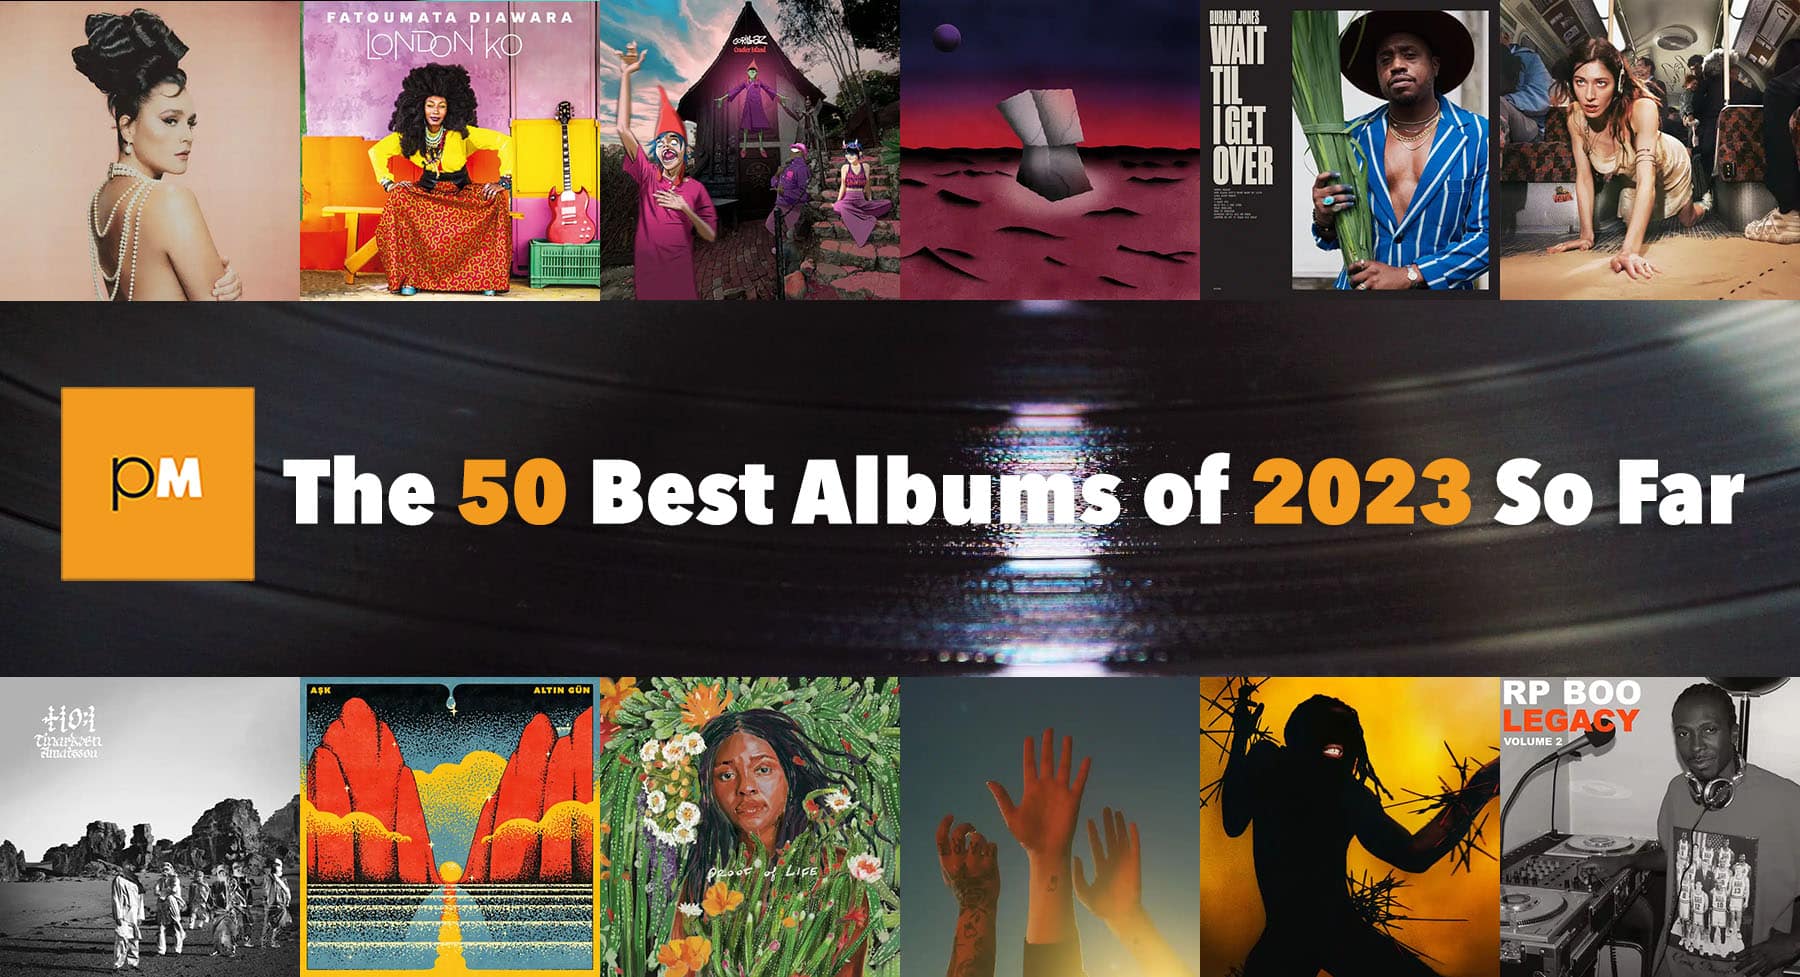 The 50 Best Albums of 2023 So Far